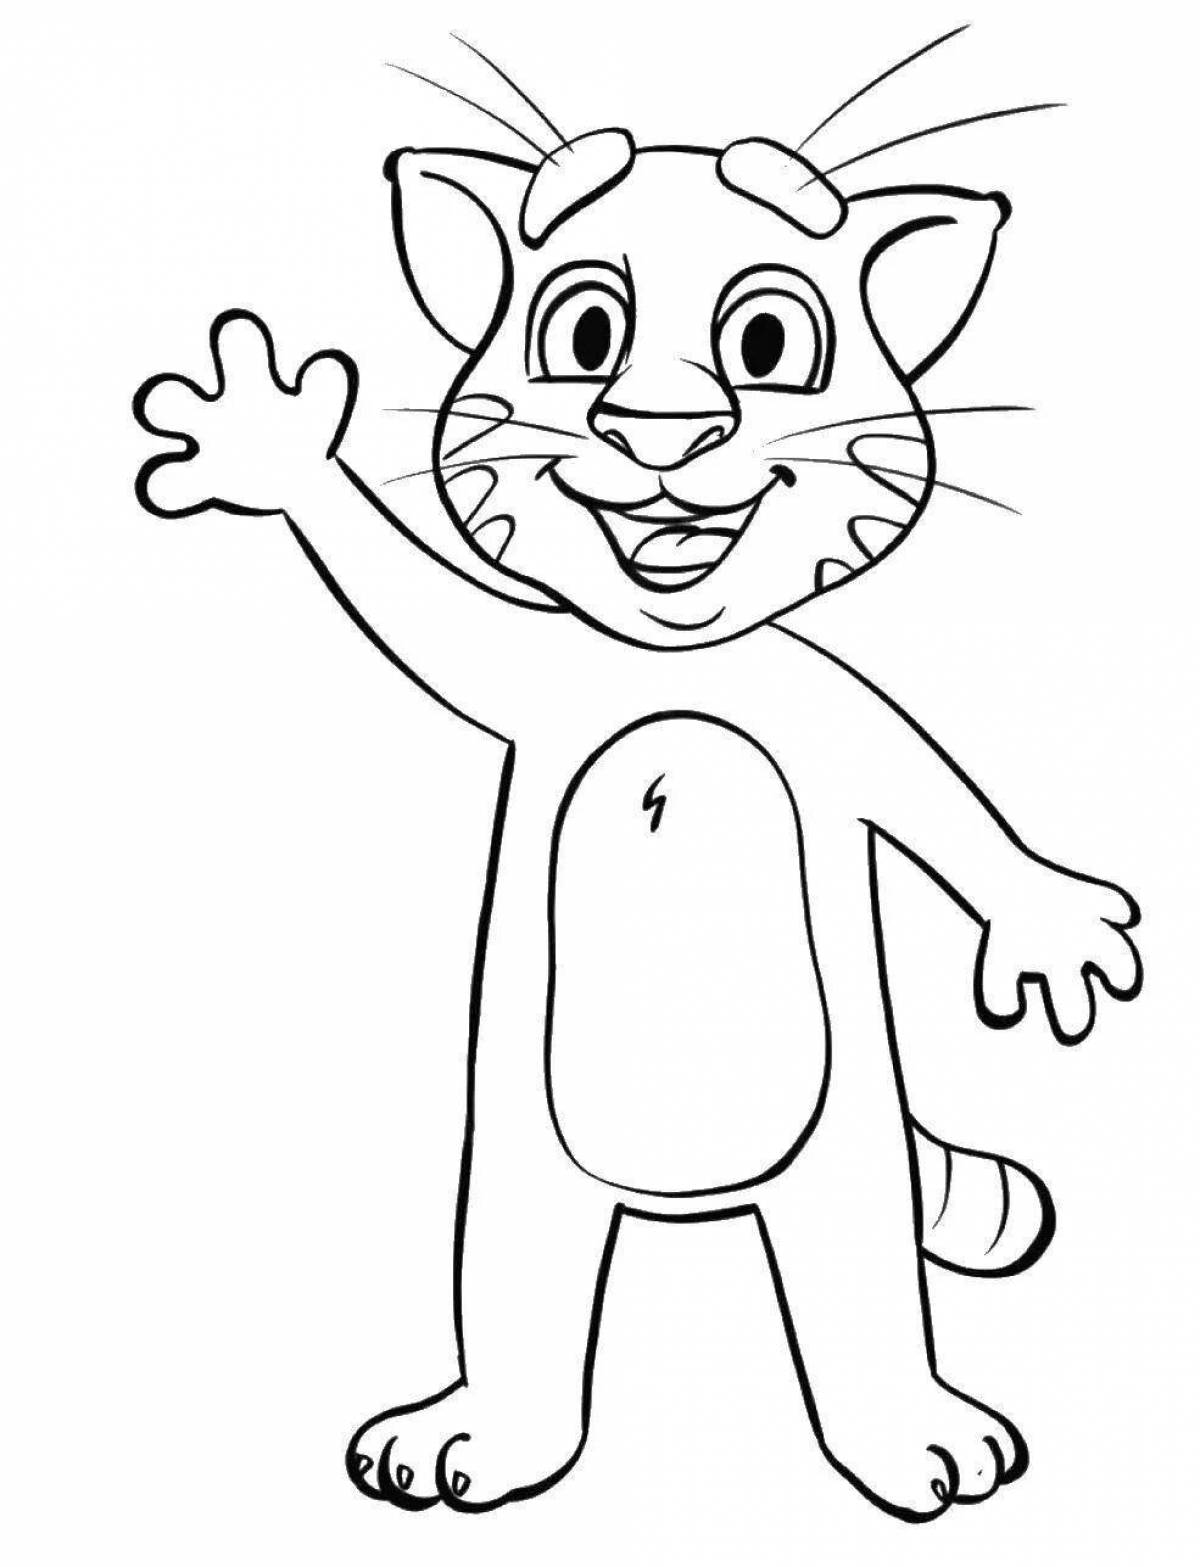 Coloring page angela cat